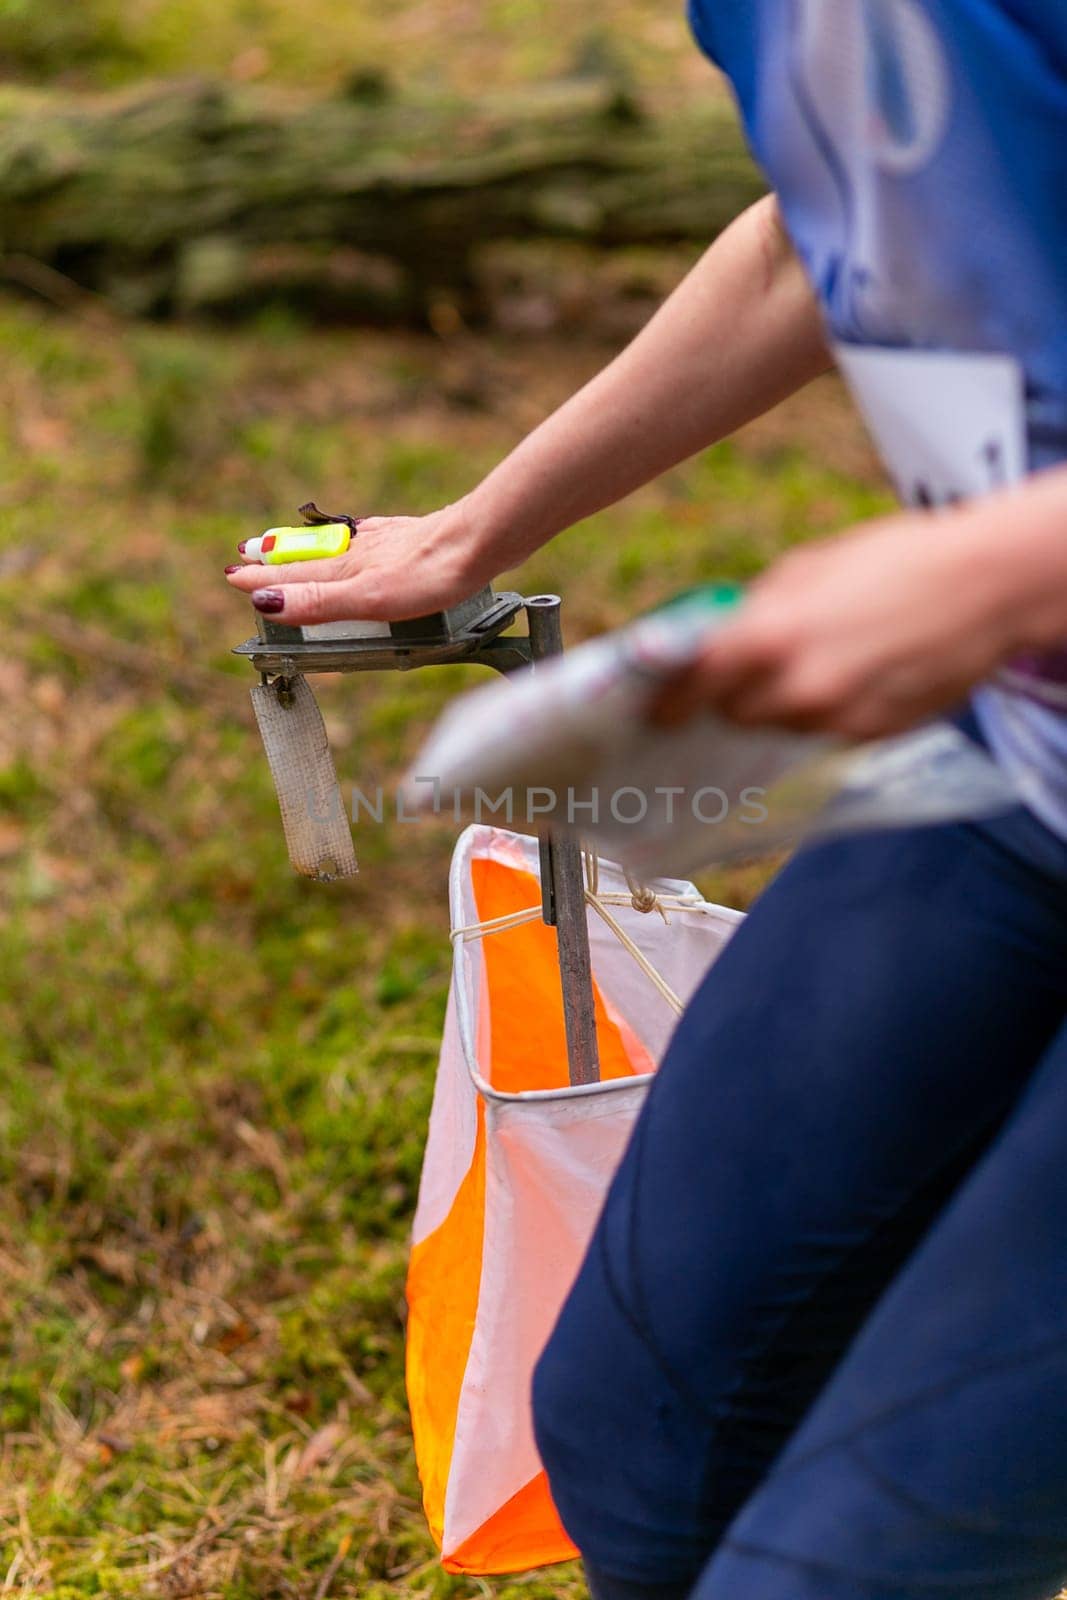 A woman punching at the orienteering control point by BY-_-BY